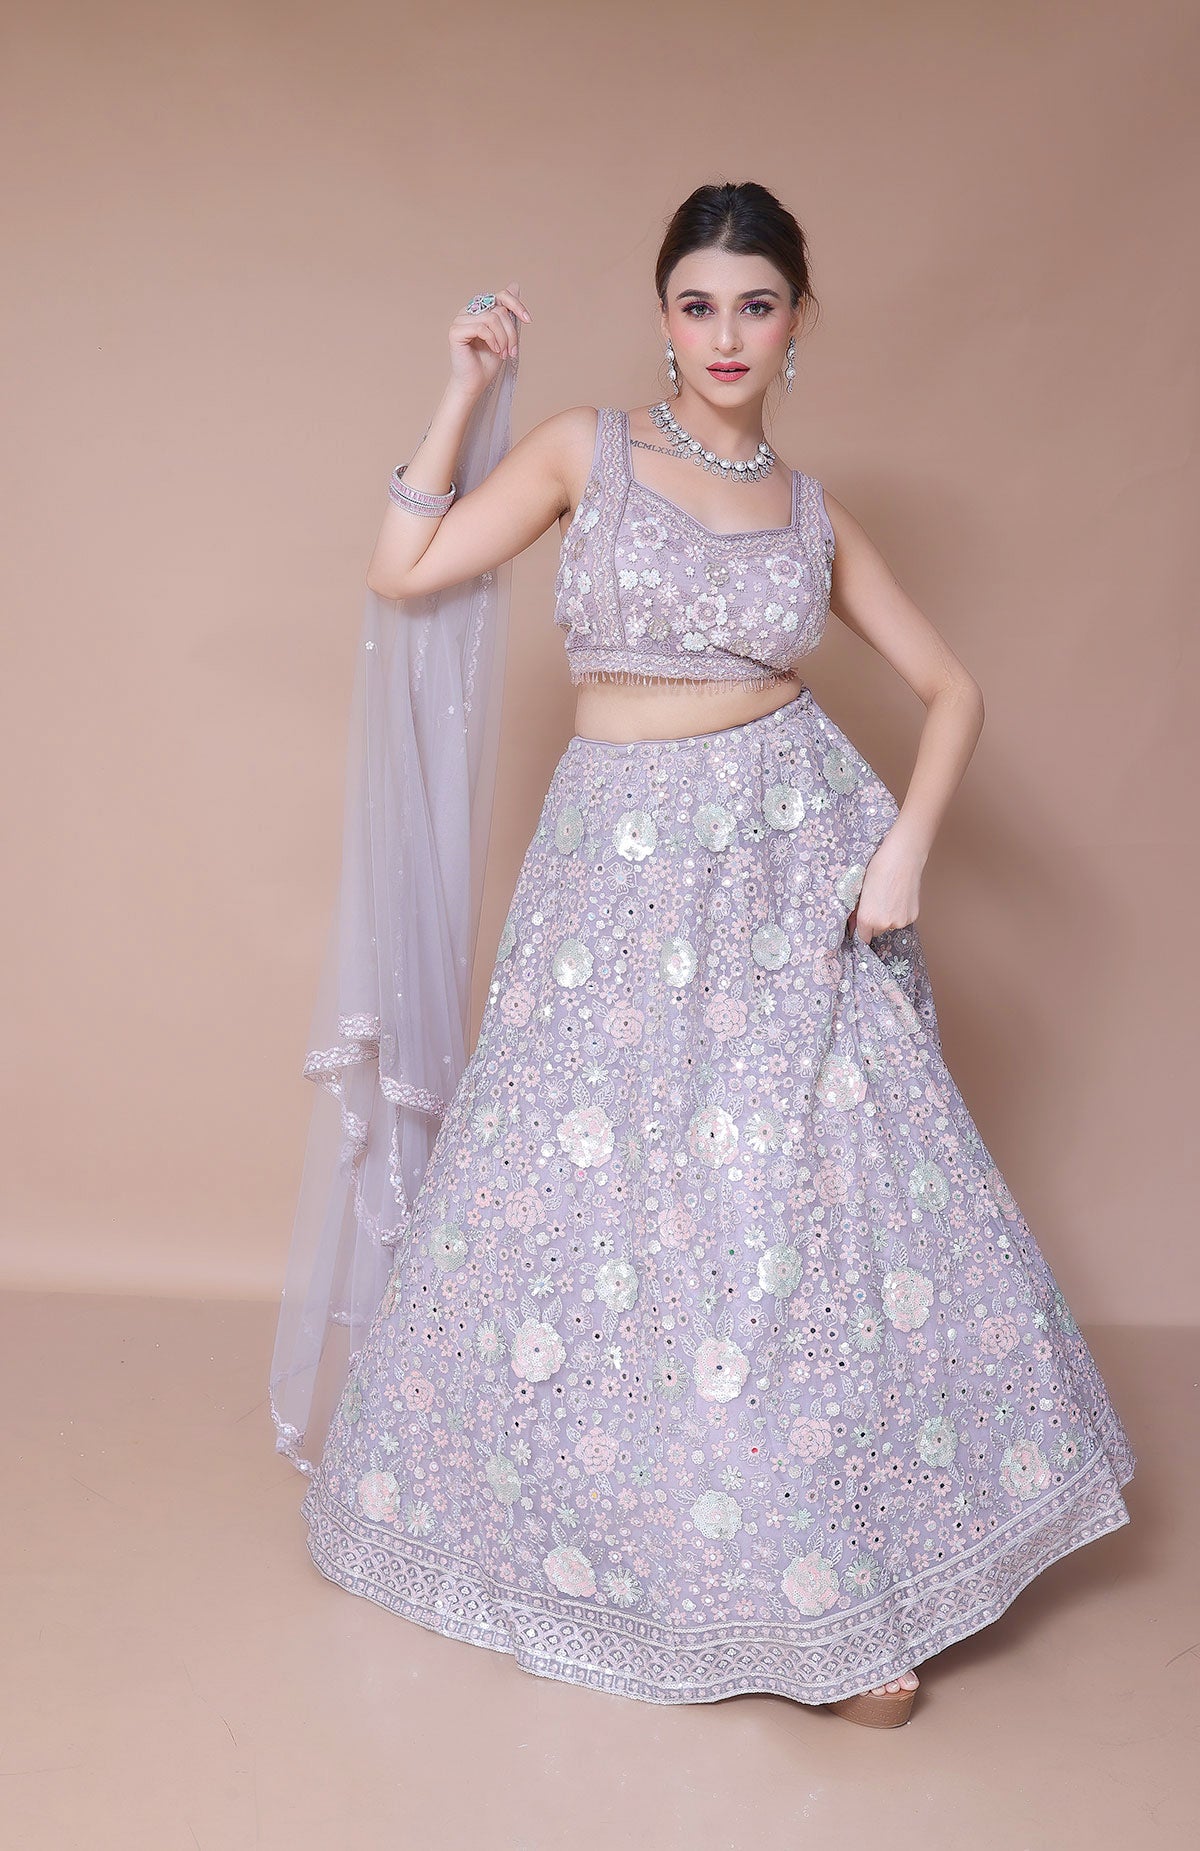 Lavender Lehenga Choli in Net embellished with hand embroidery